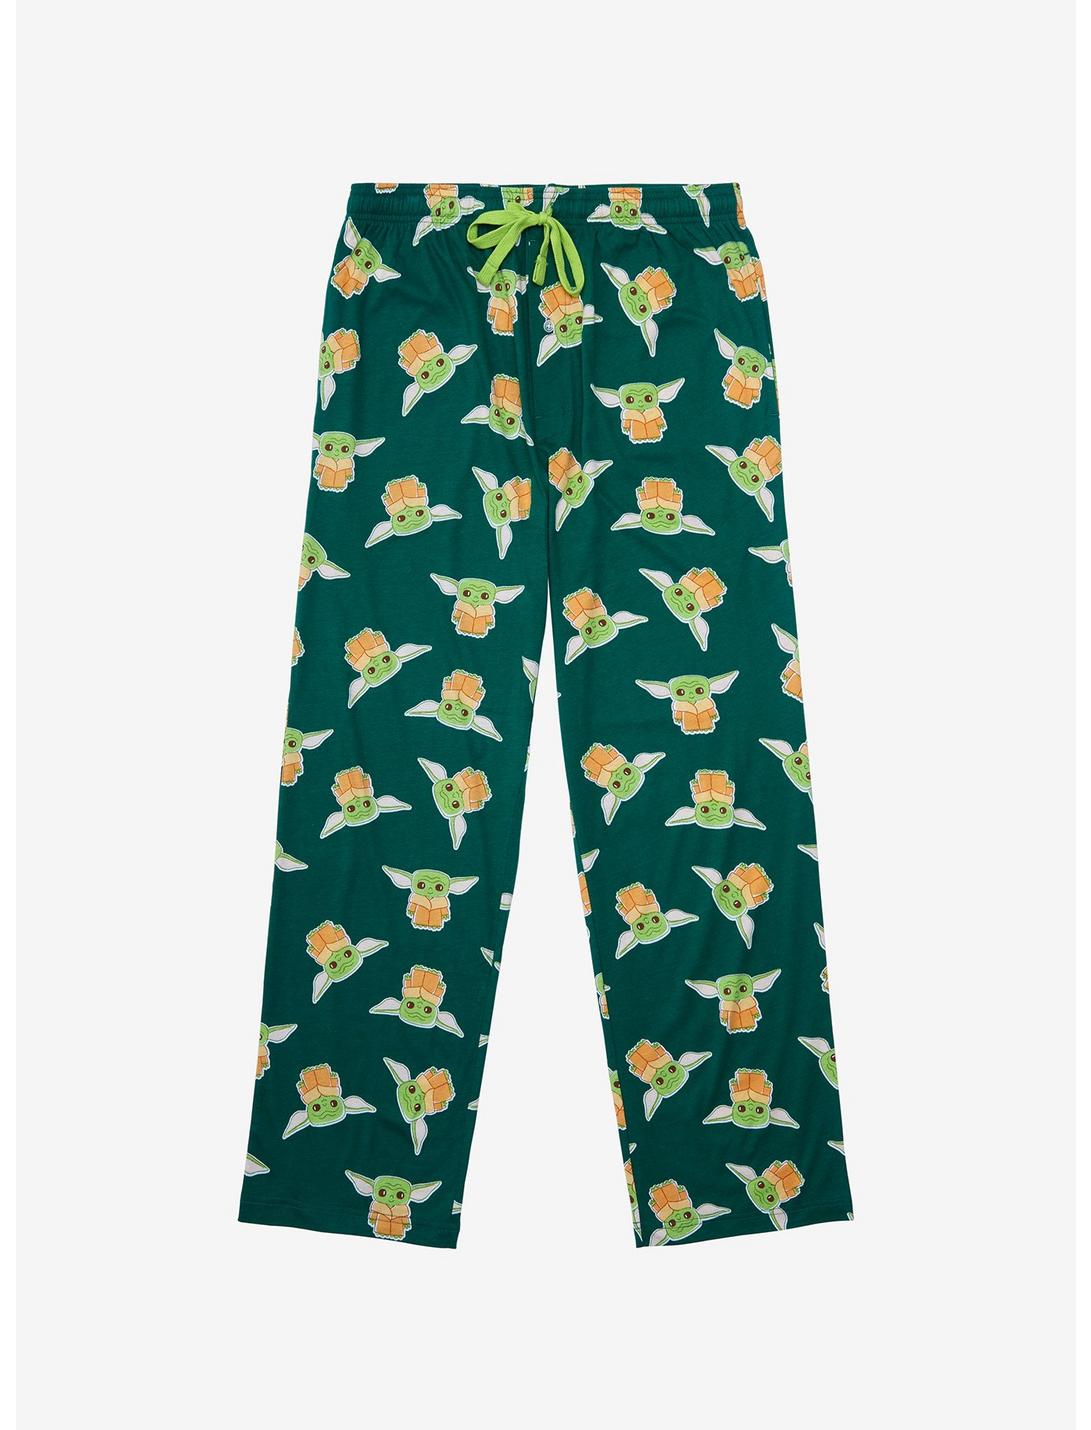 Star Wars The Mandalorian The Child Allover Print Sleep Pants - BoxLunch Exclusive, MULTI, hi-res